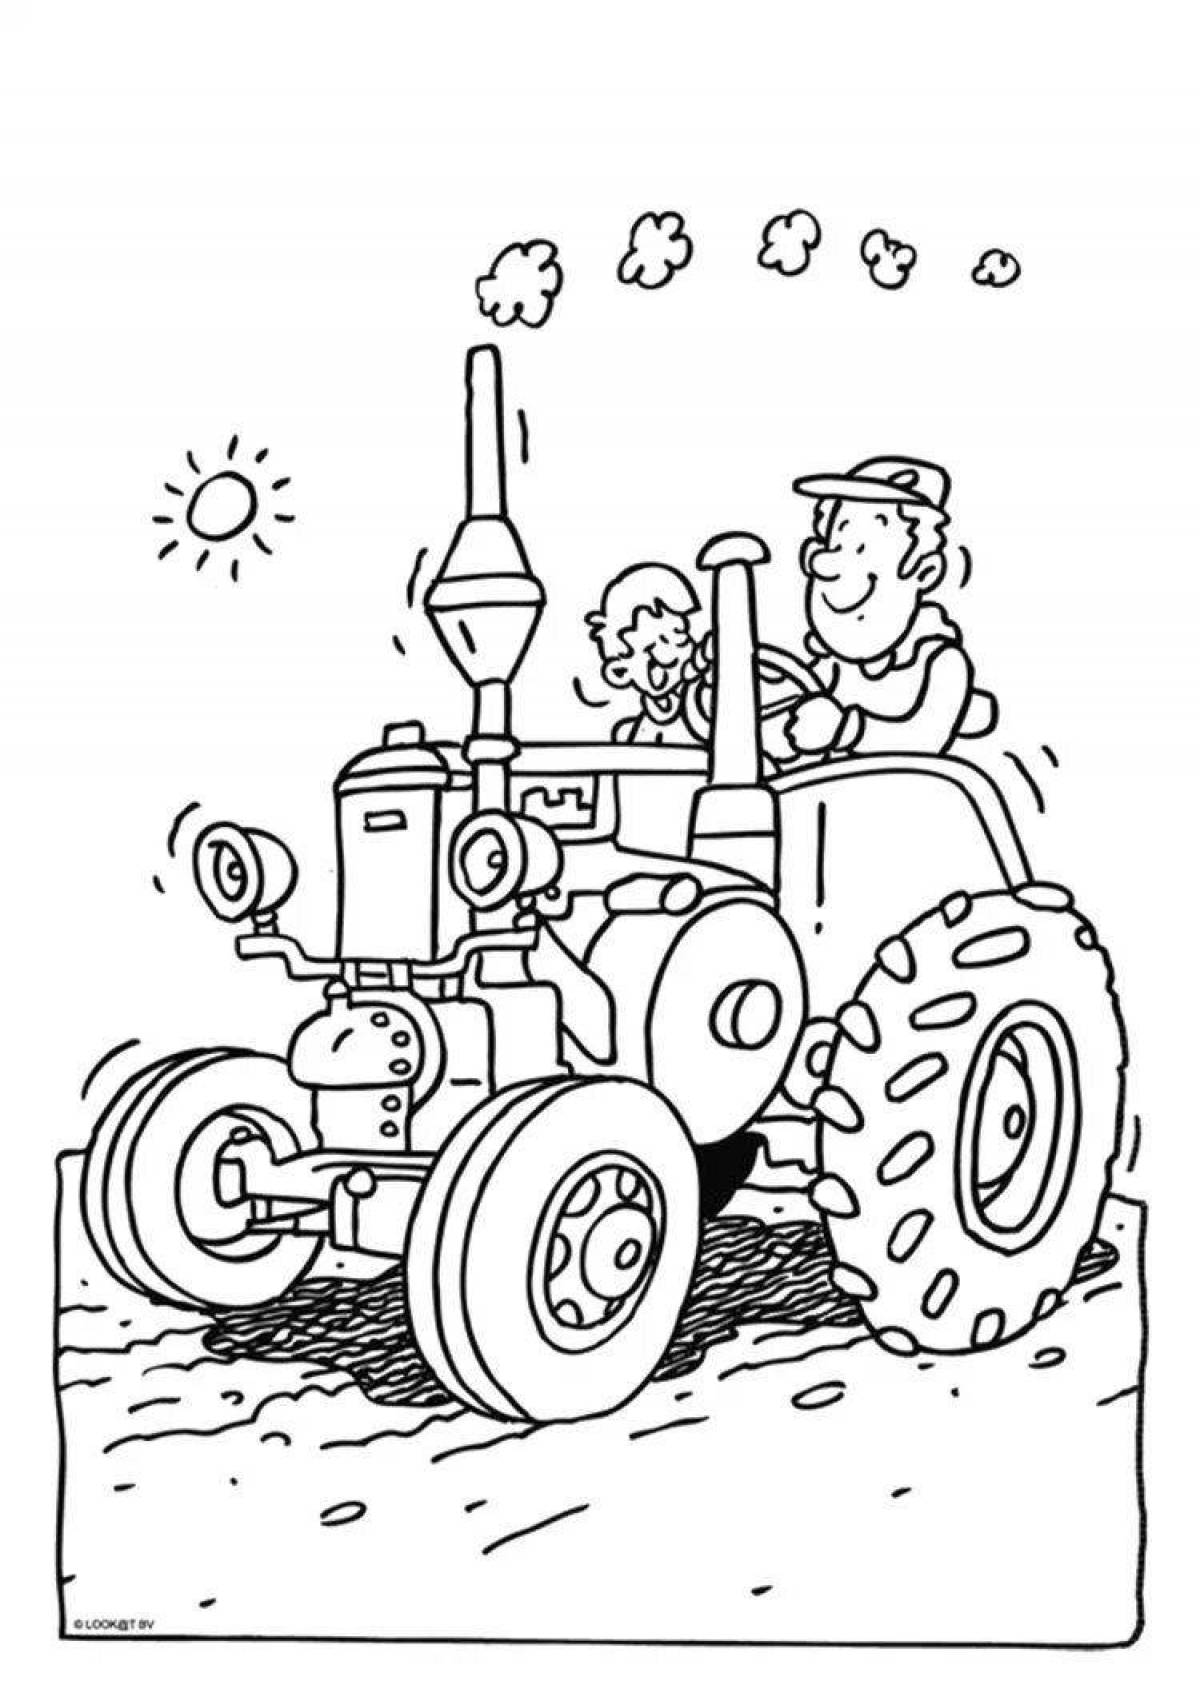 Splendid agriculture coloring page